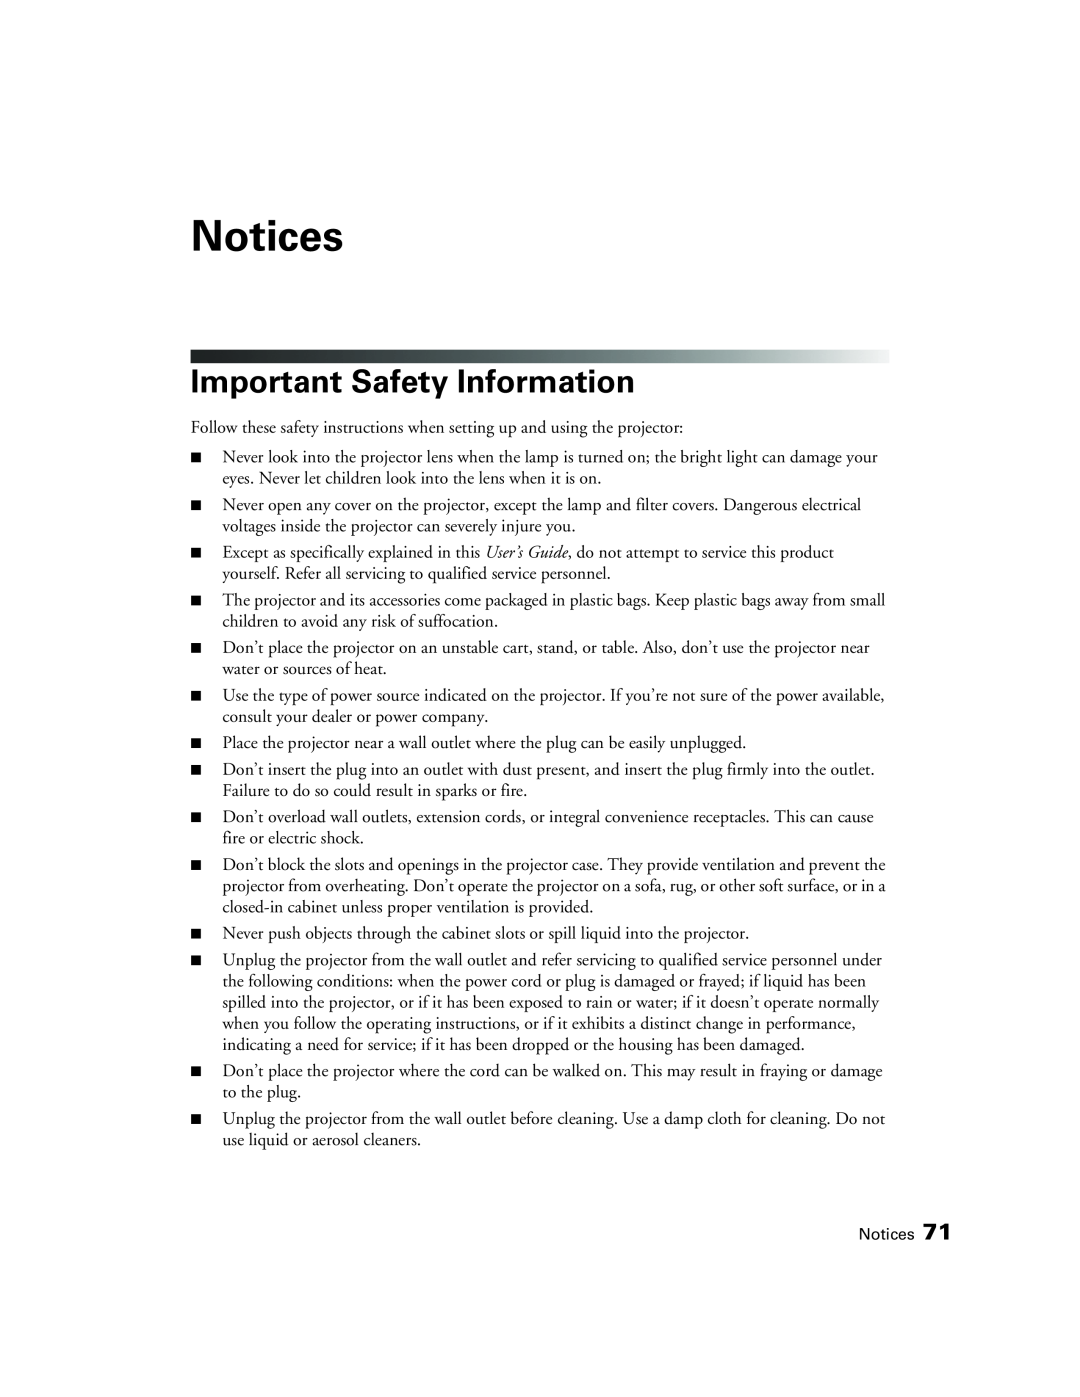 Epson 9700, 9350 manual Notices, Important Safety Information 